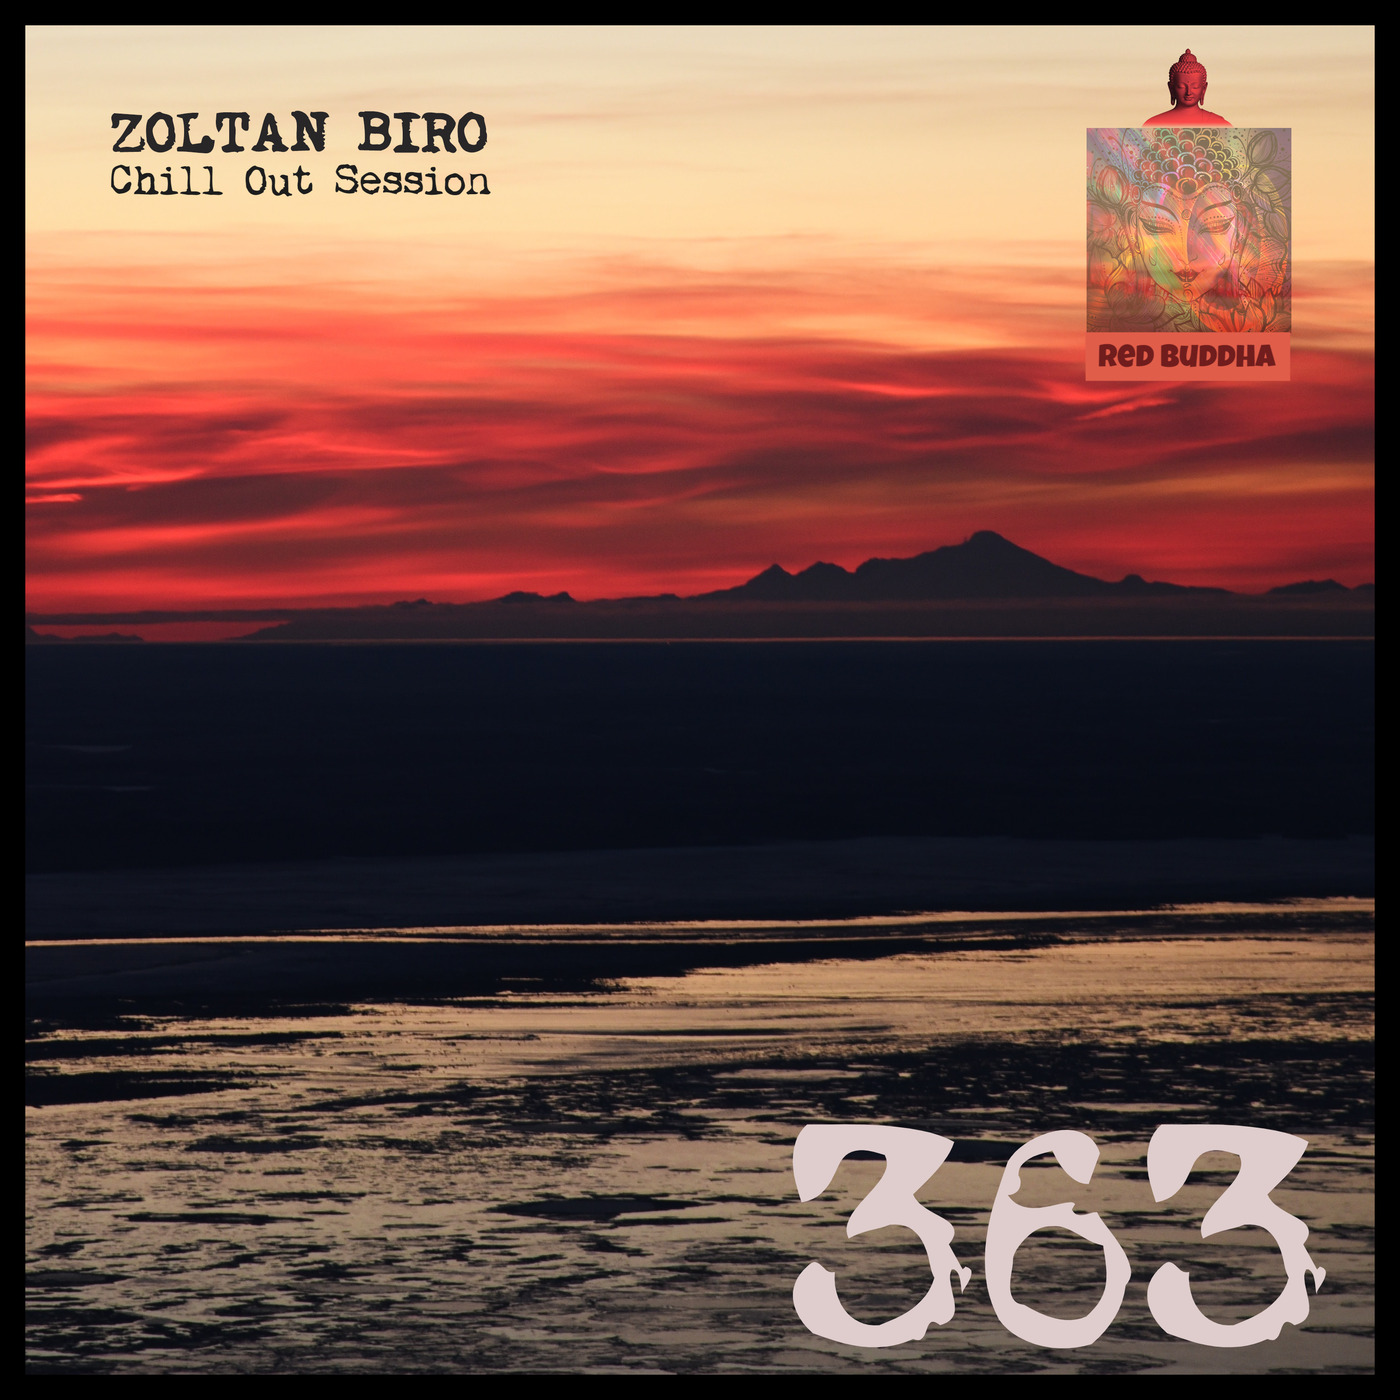 Zoltan Biro - Chill Out Session 363 [including: Red Buddha Special Mix]